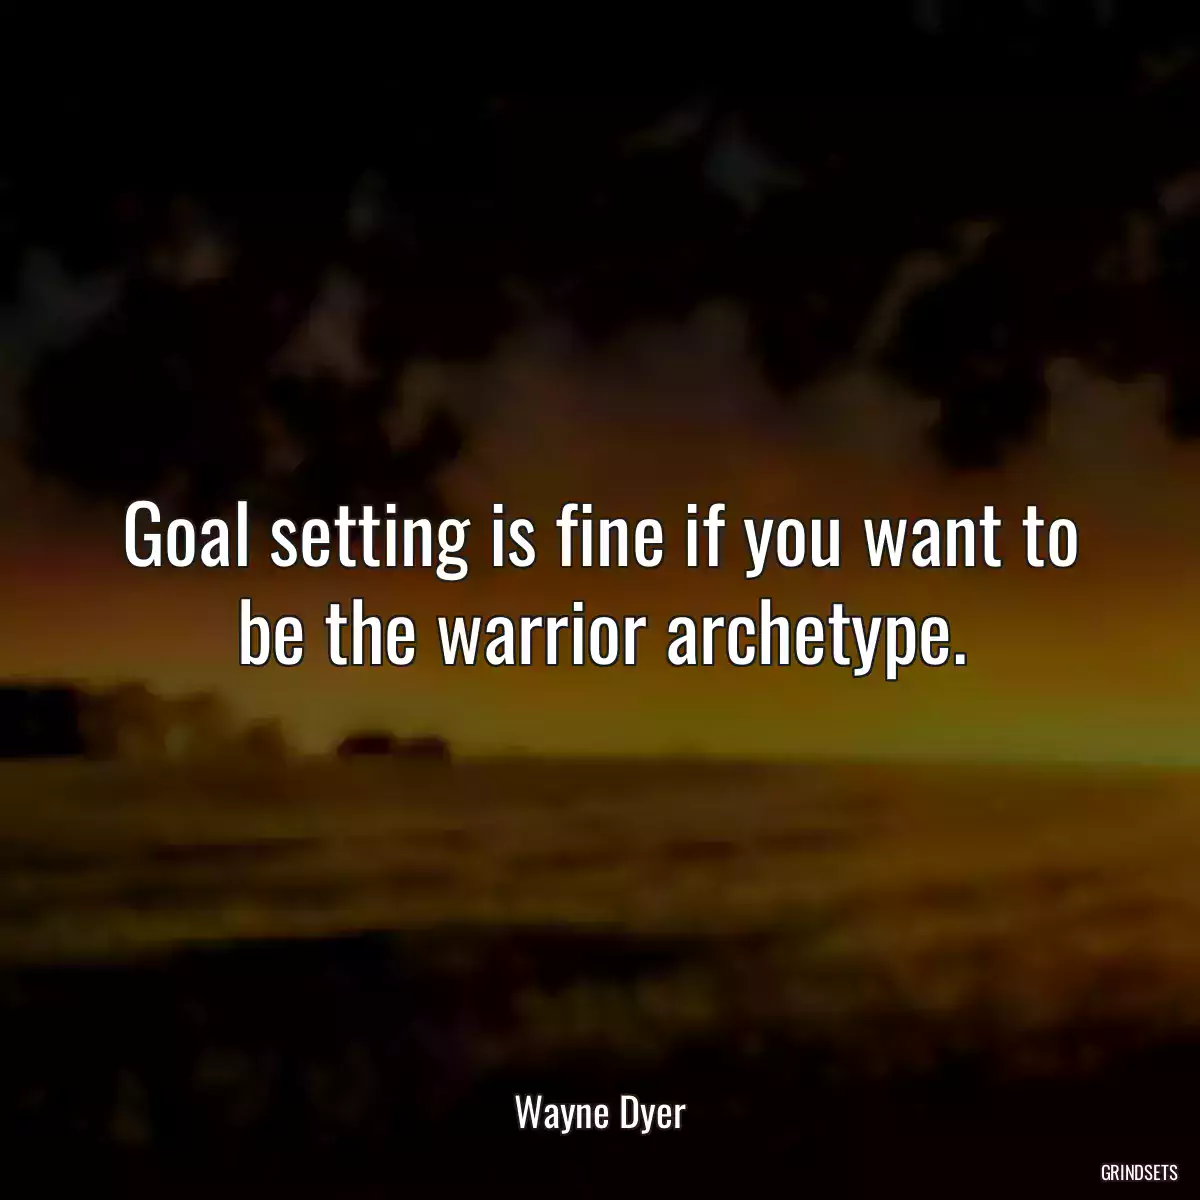 Goal setting is fine if you want to be the warrior archetype.